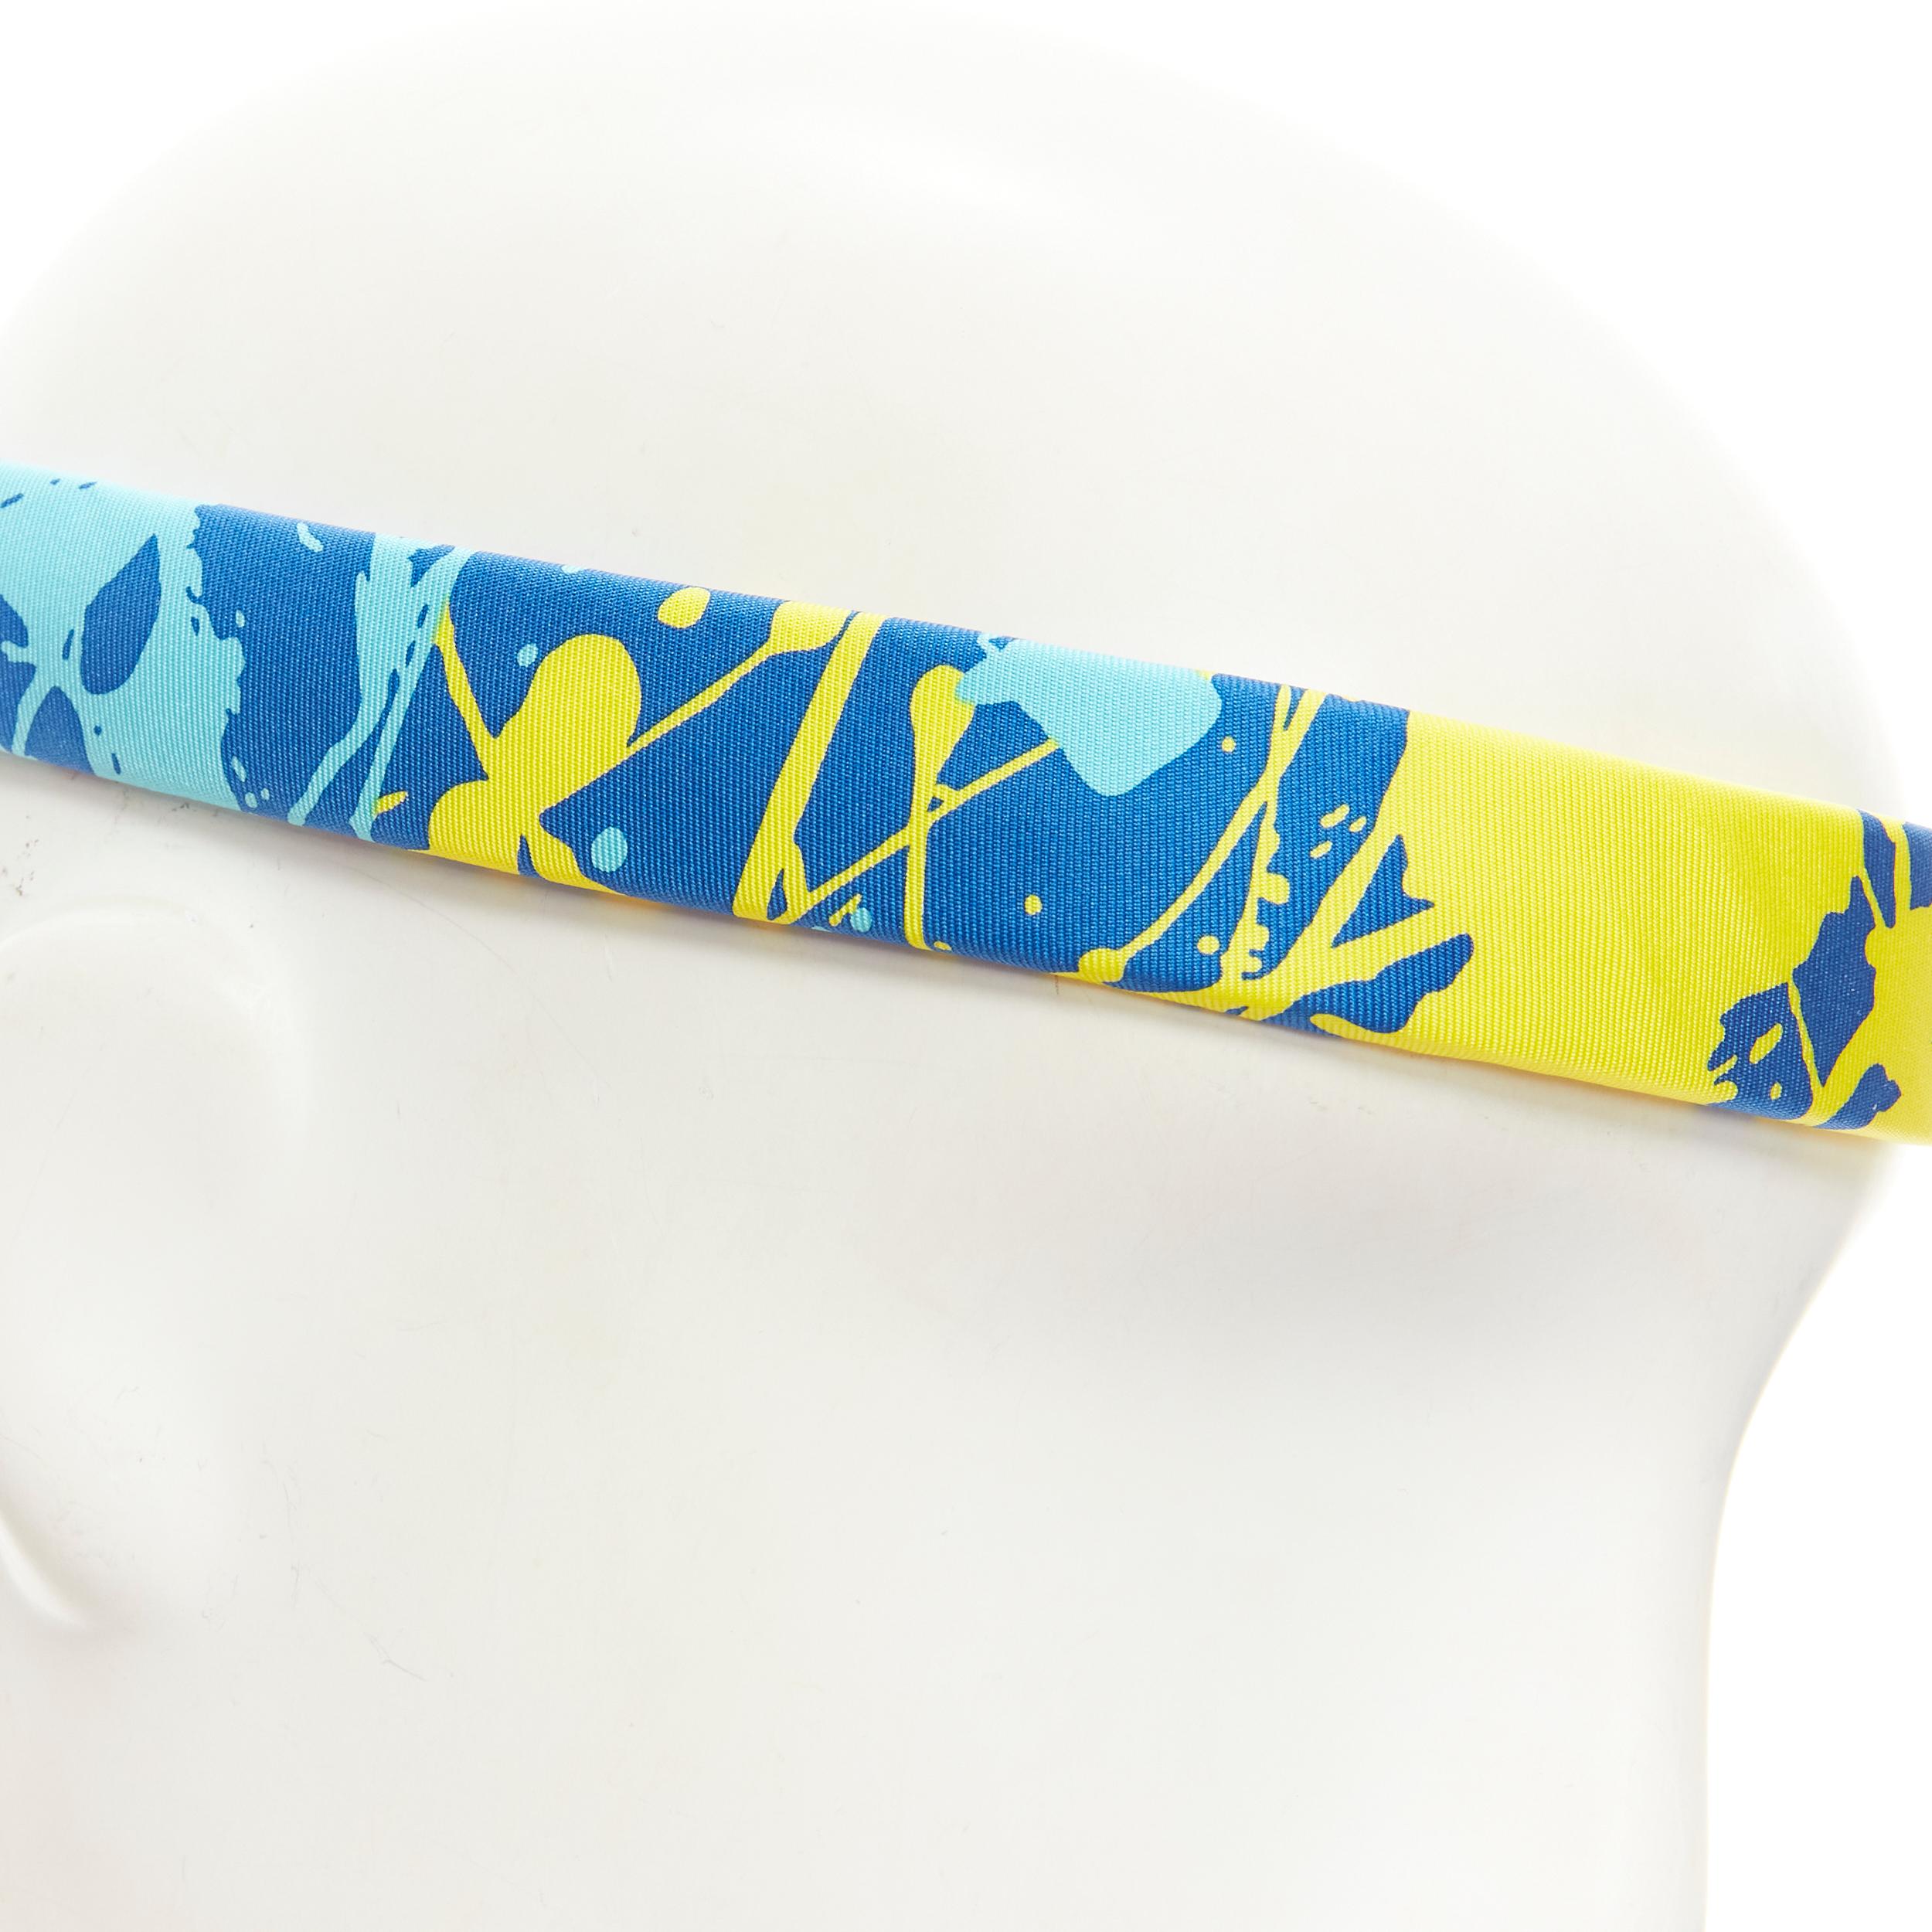 rare HERMES Bandeau Femme Mistinguette 100% silk blue yellow adjustable headband In New Condition For Sale In Hong Kong, NT